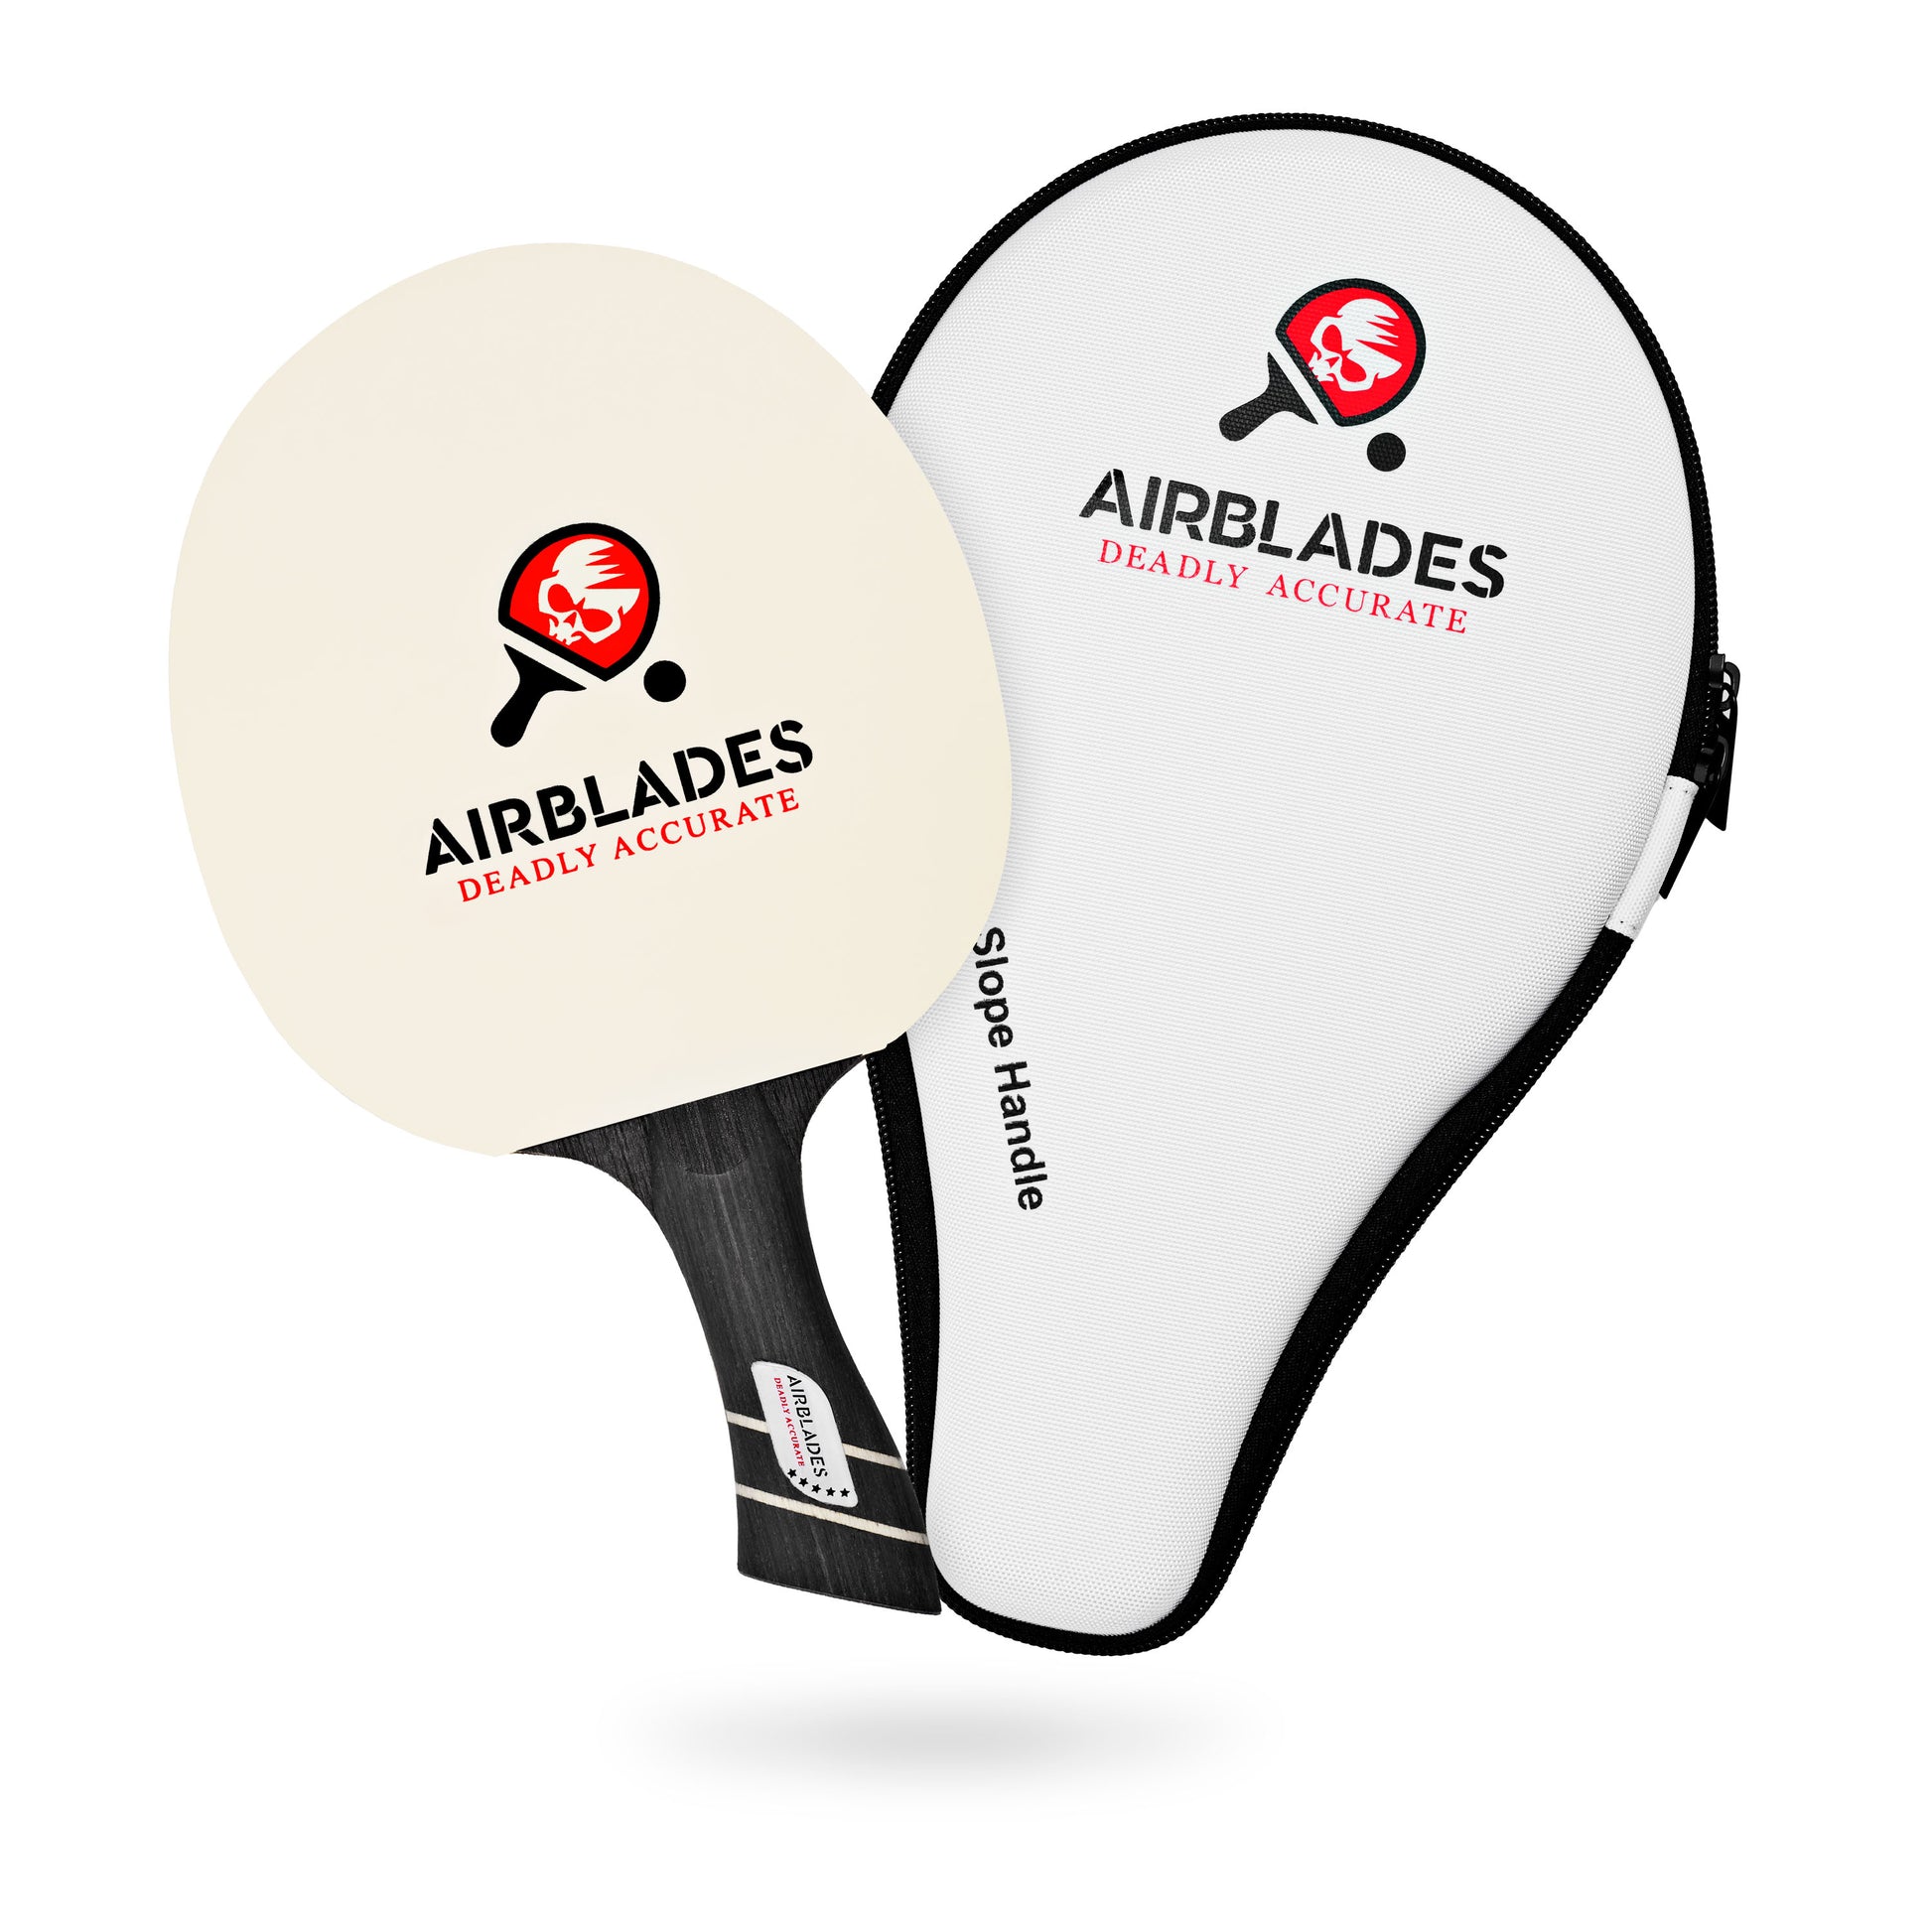 Airblades 6 Star Professional Ping Pong Paddle for Advanced/competition Players -Table Tennis Paddle Featuring Ergonomic Slope Handle Design -Also Inc